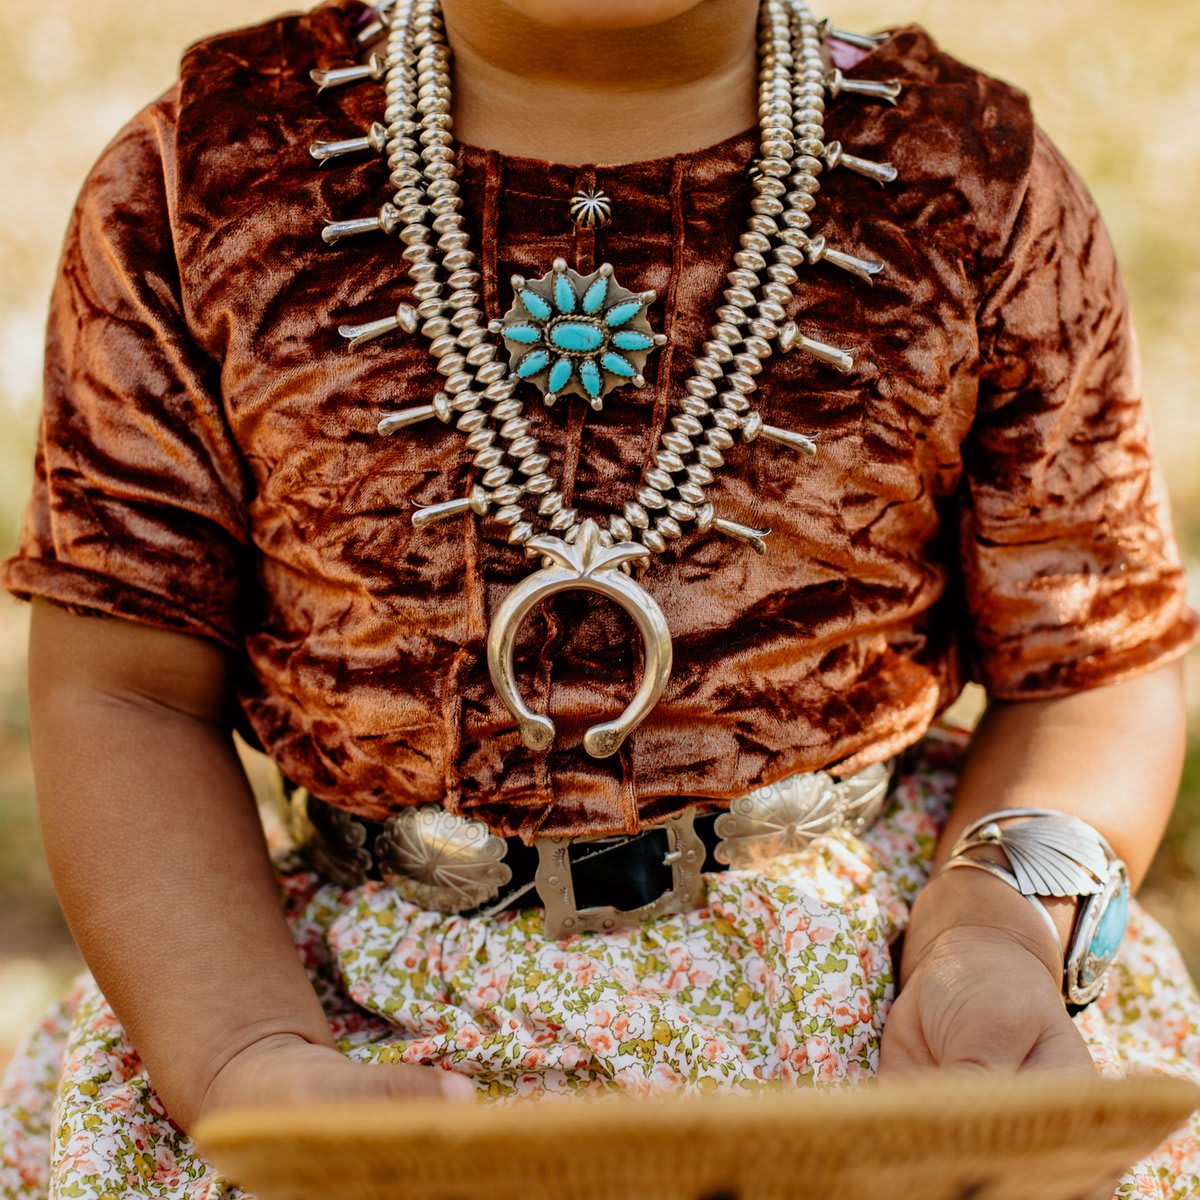 "The wedding basket symbolizes the path of life from infancy (center) to elderly (outer sides) years of one's life. Her jewelry lay and is worn as armor of strength and protection." 📸 + 💭: Char Yazzie (IG // charyazziephotos)